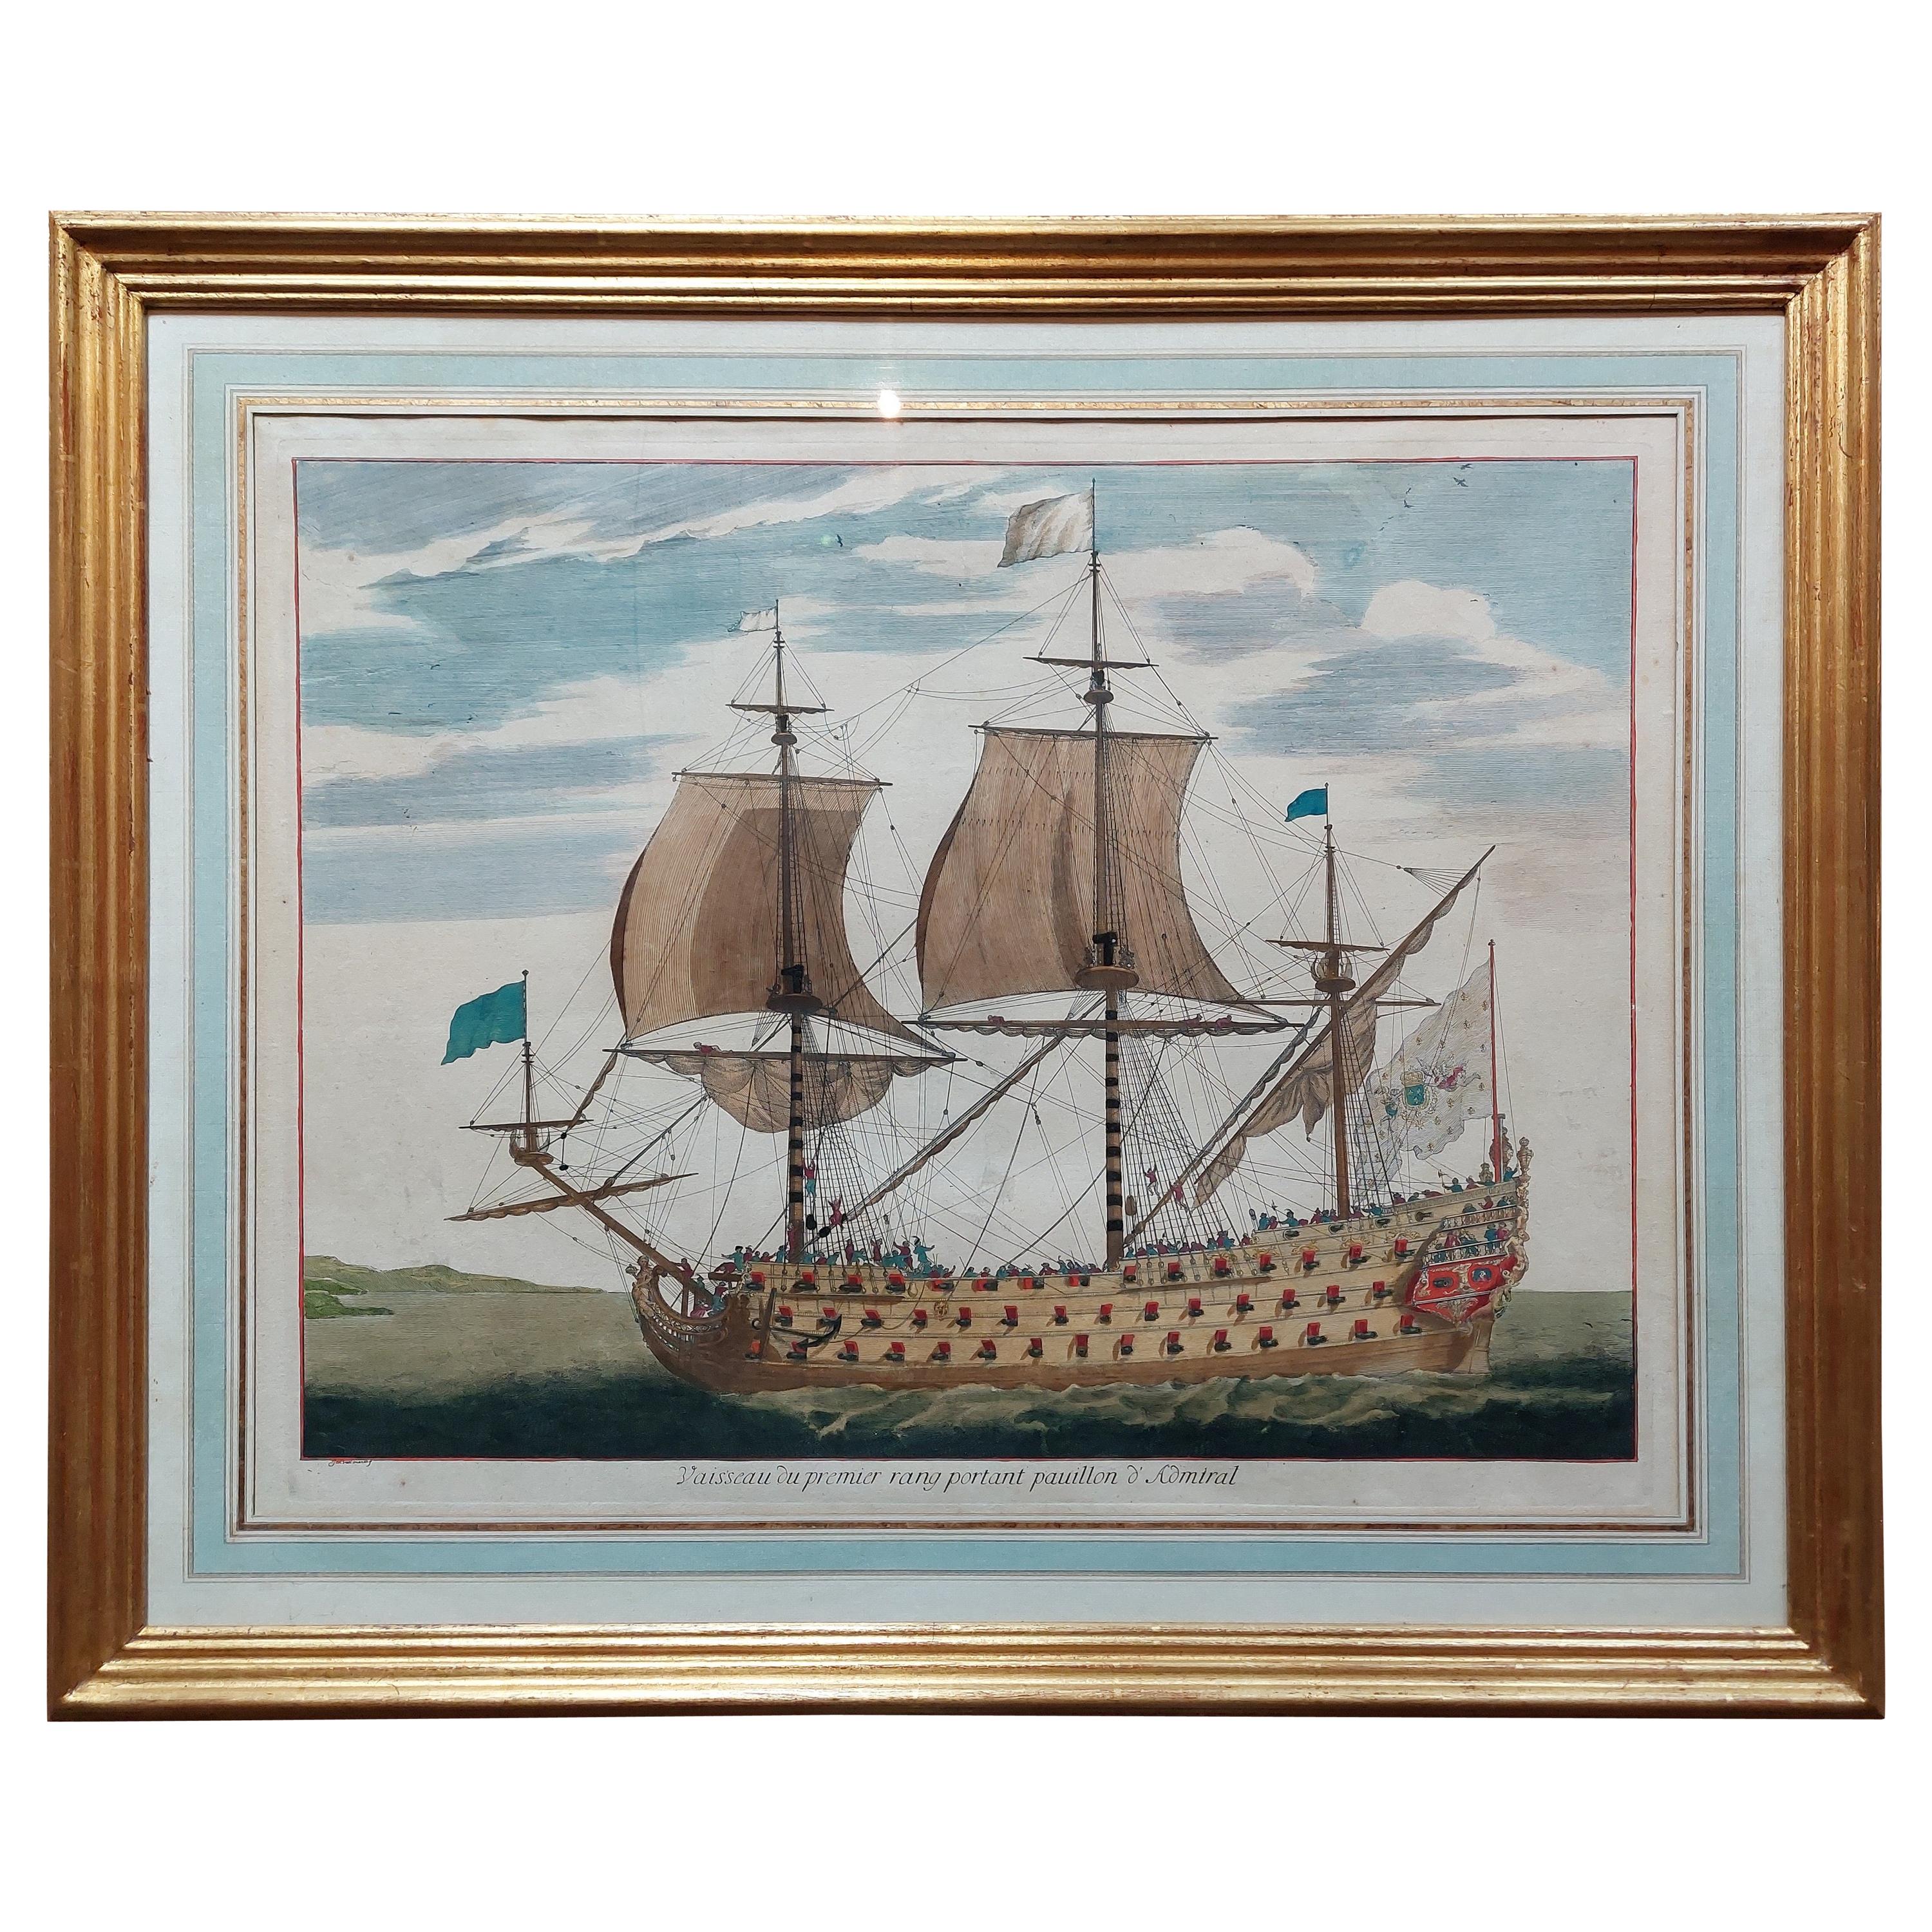 Antique Print of a Naval Vessel by Mortier '1695' For Sale